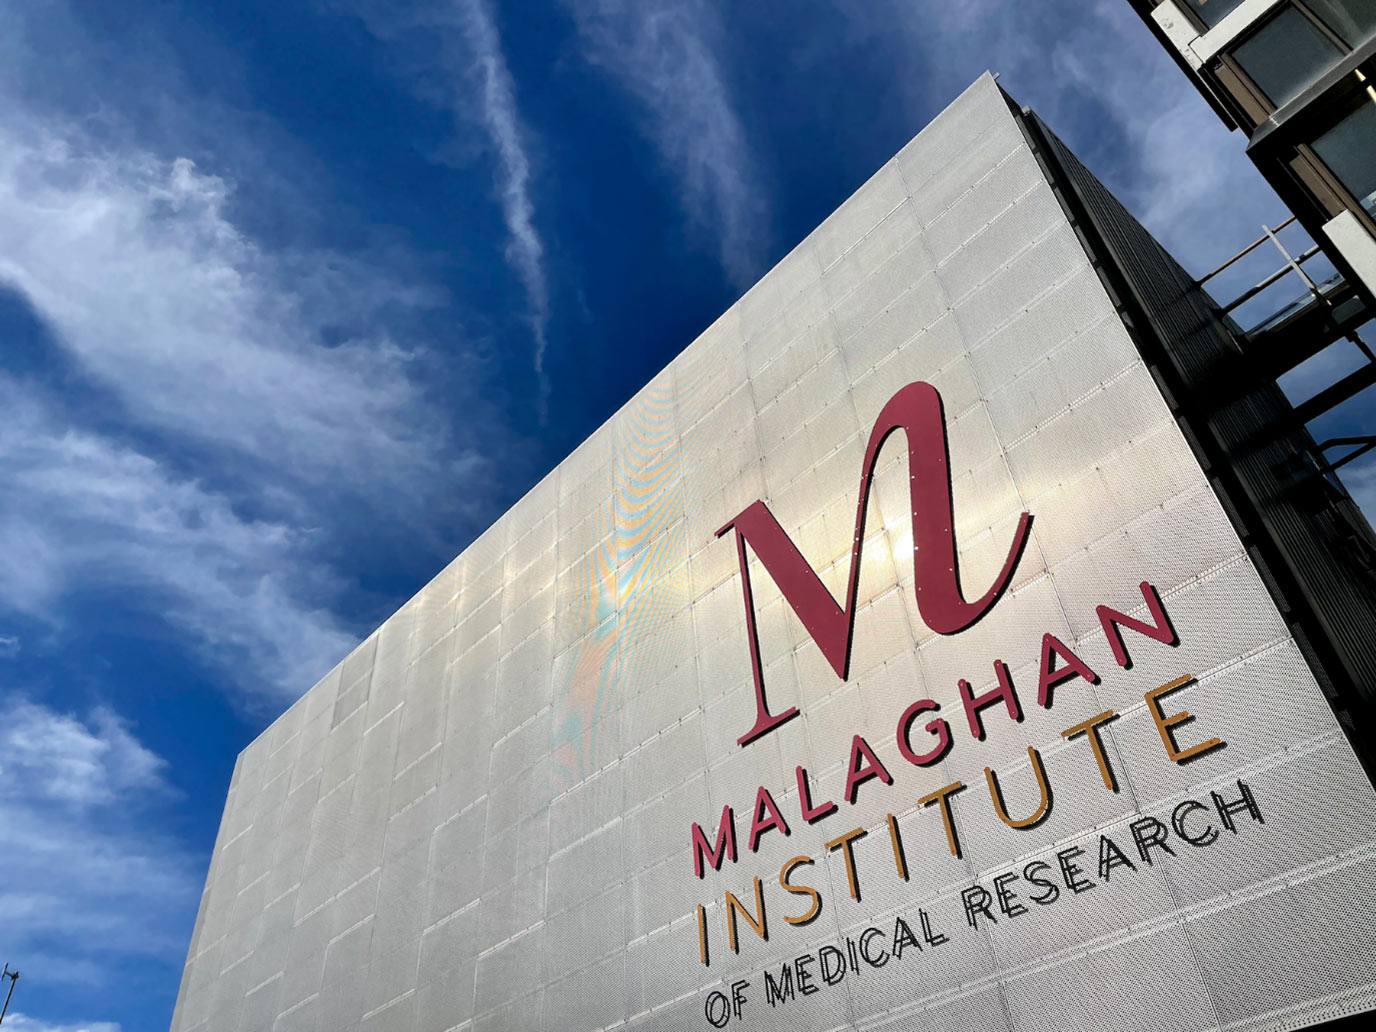 Malaghan Institute building